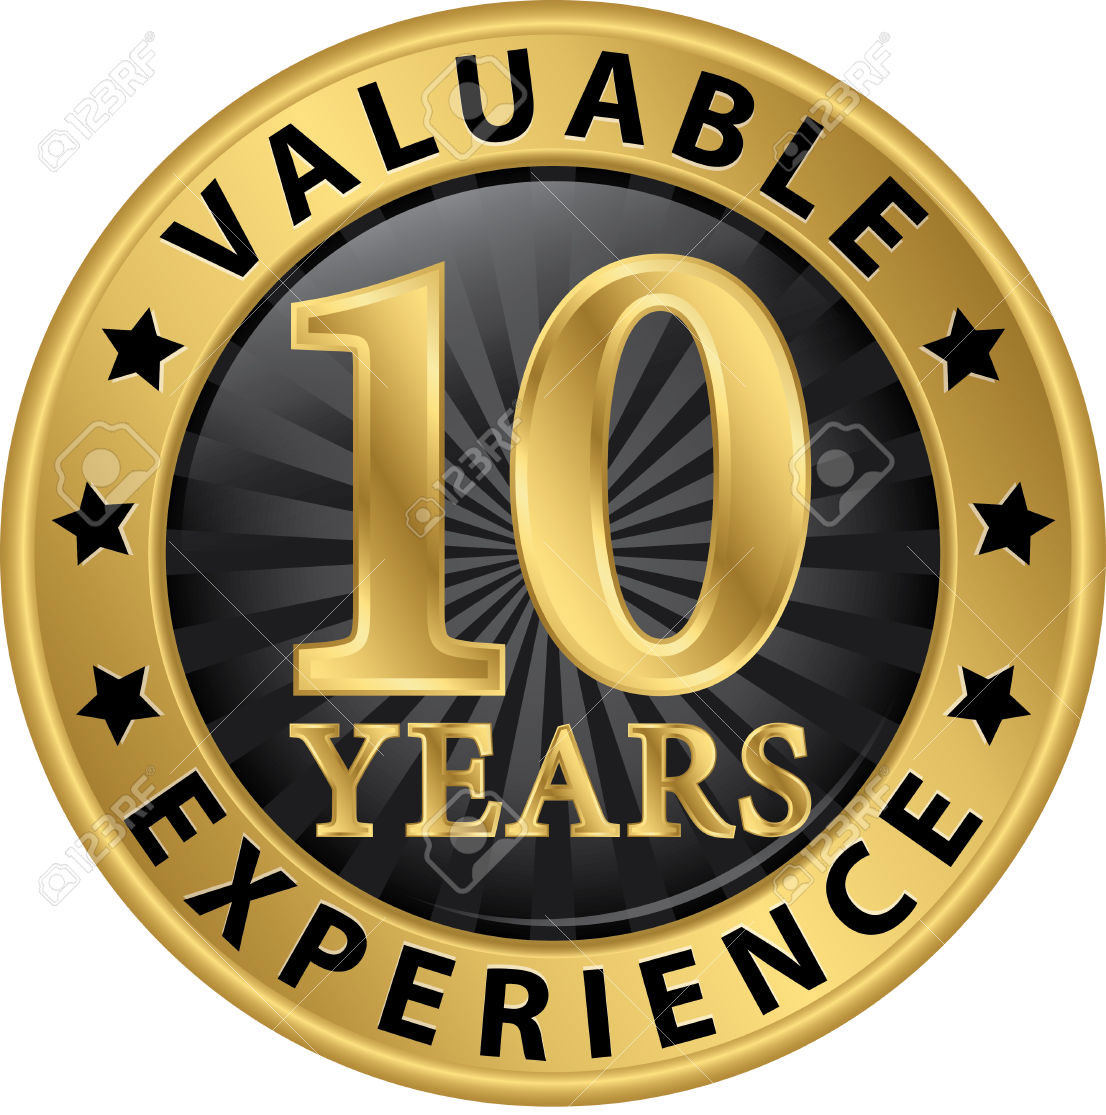 10 years,dedicated to industrial rubber hose